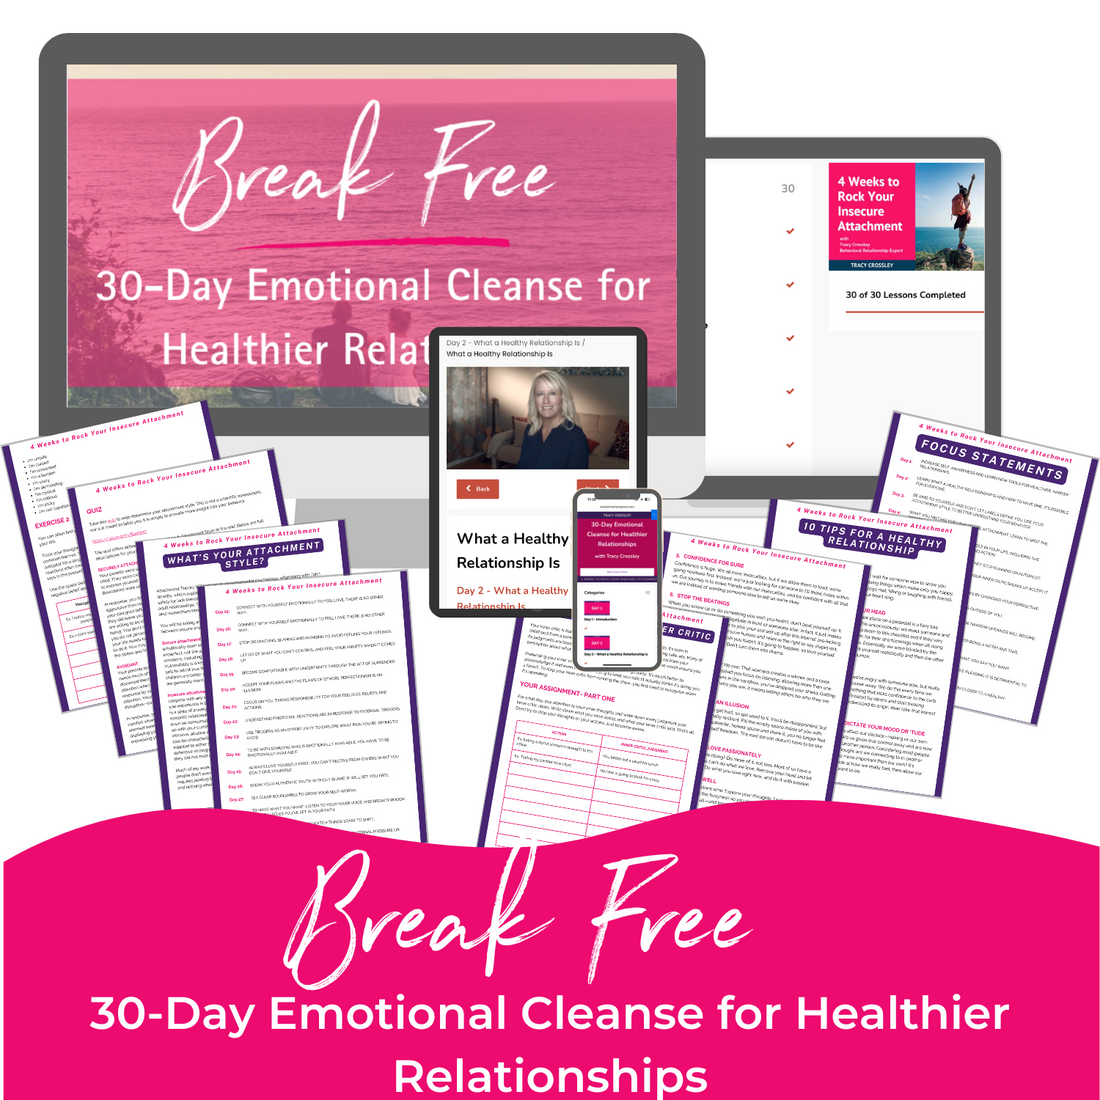 Break Free: 30-Day Emotional Cleanse for Healthier Relationships